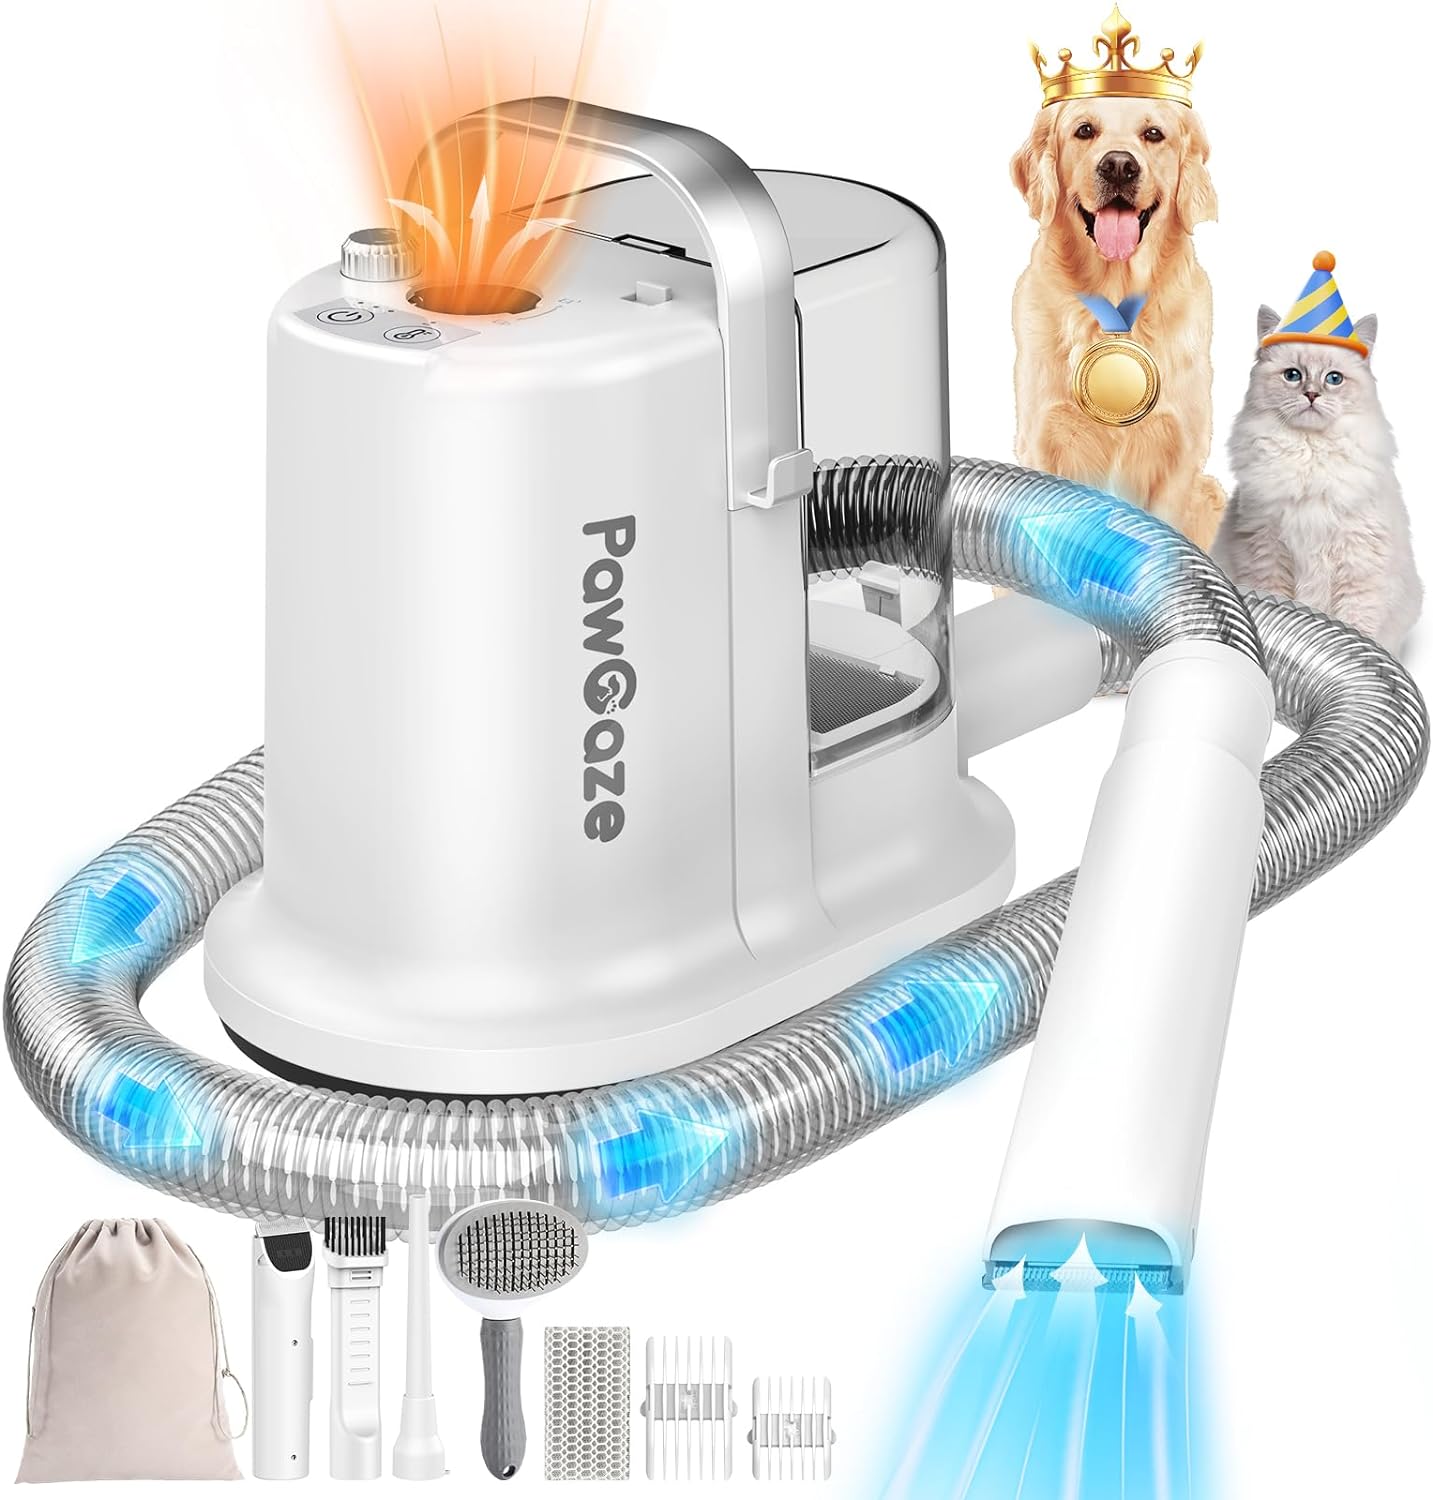 3 in 1 Pet Grooming Vacuum  Hot/Cold Dryers,Quiet Dog Grooming Kit,13000Pa Strong Dog/Cat Vacuum Cleaners for Shedding,Suction 99.99% Pet Hair,4 Pet Grooming  Trimmer Tools. (White)